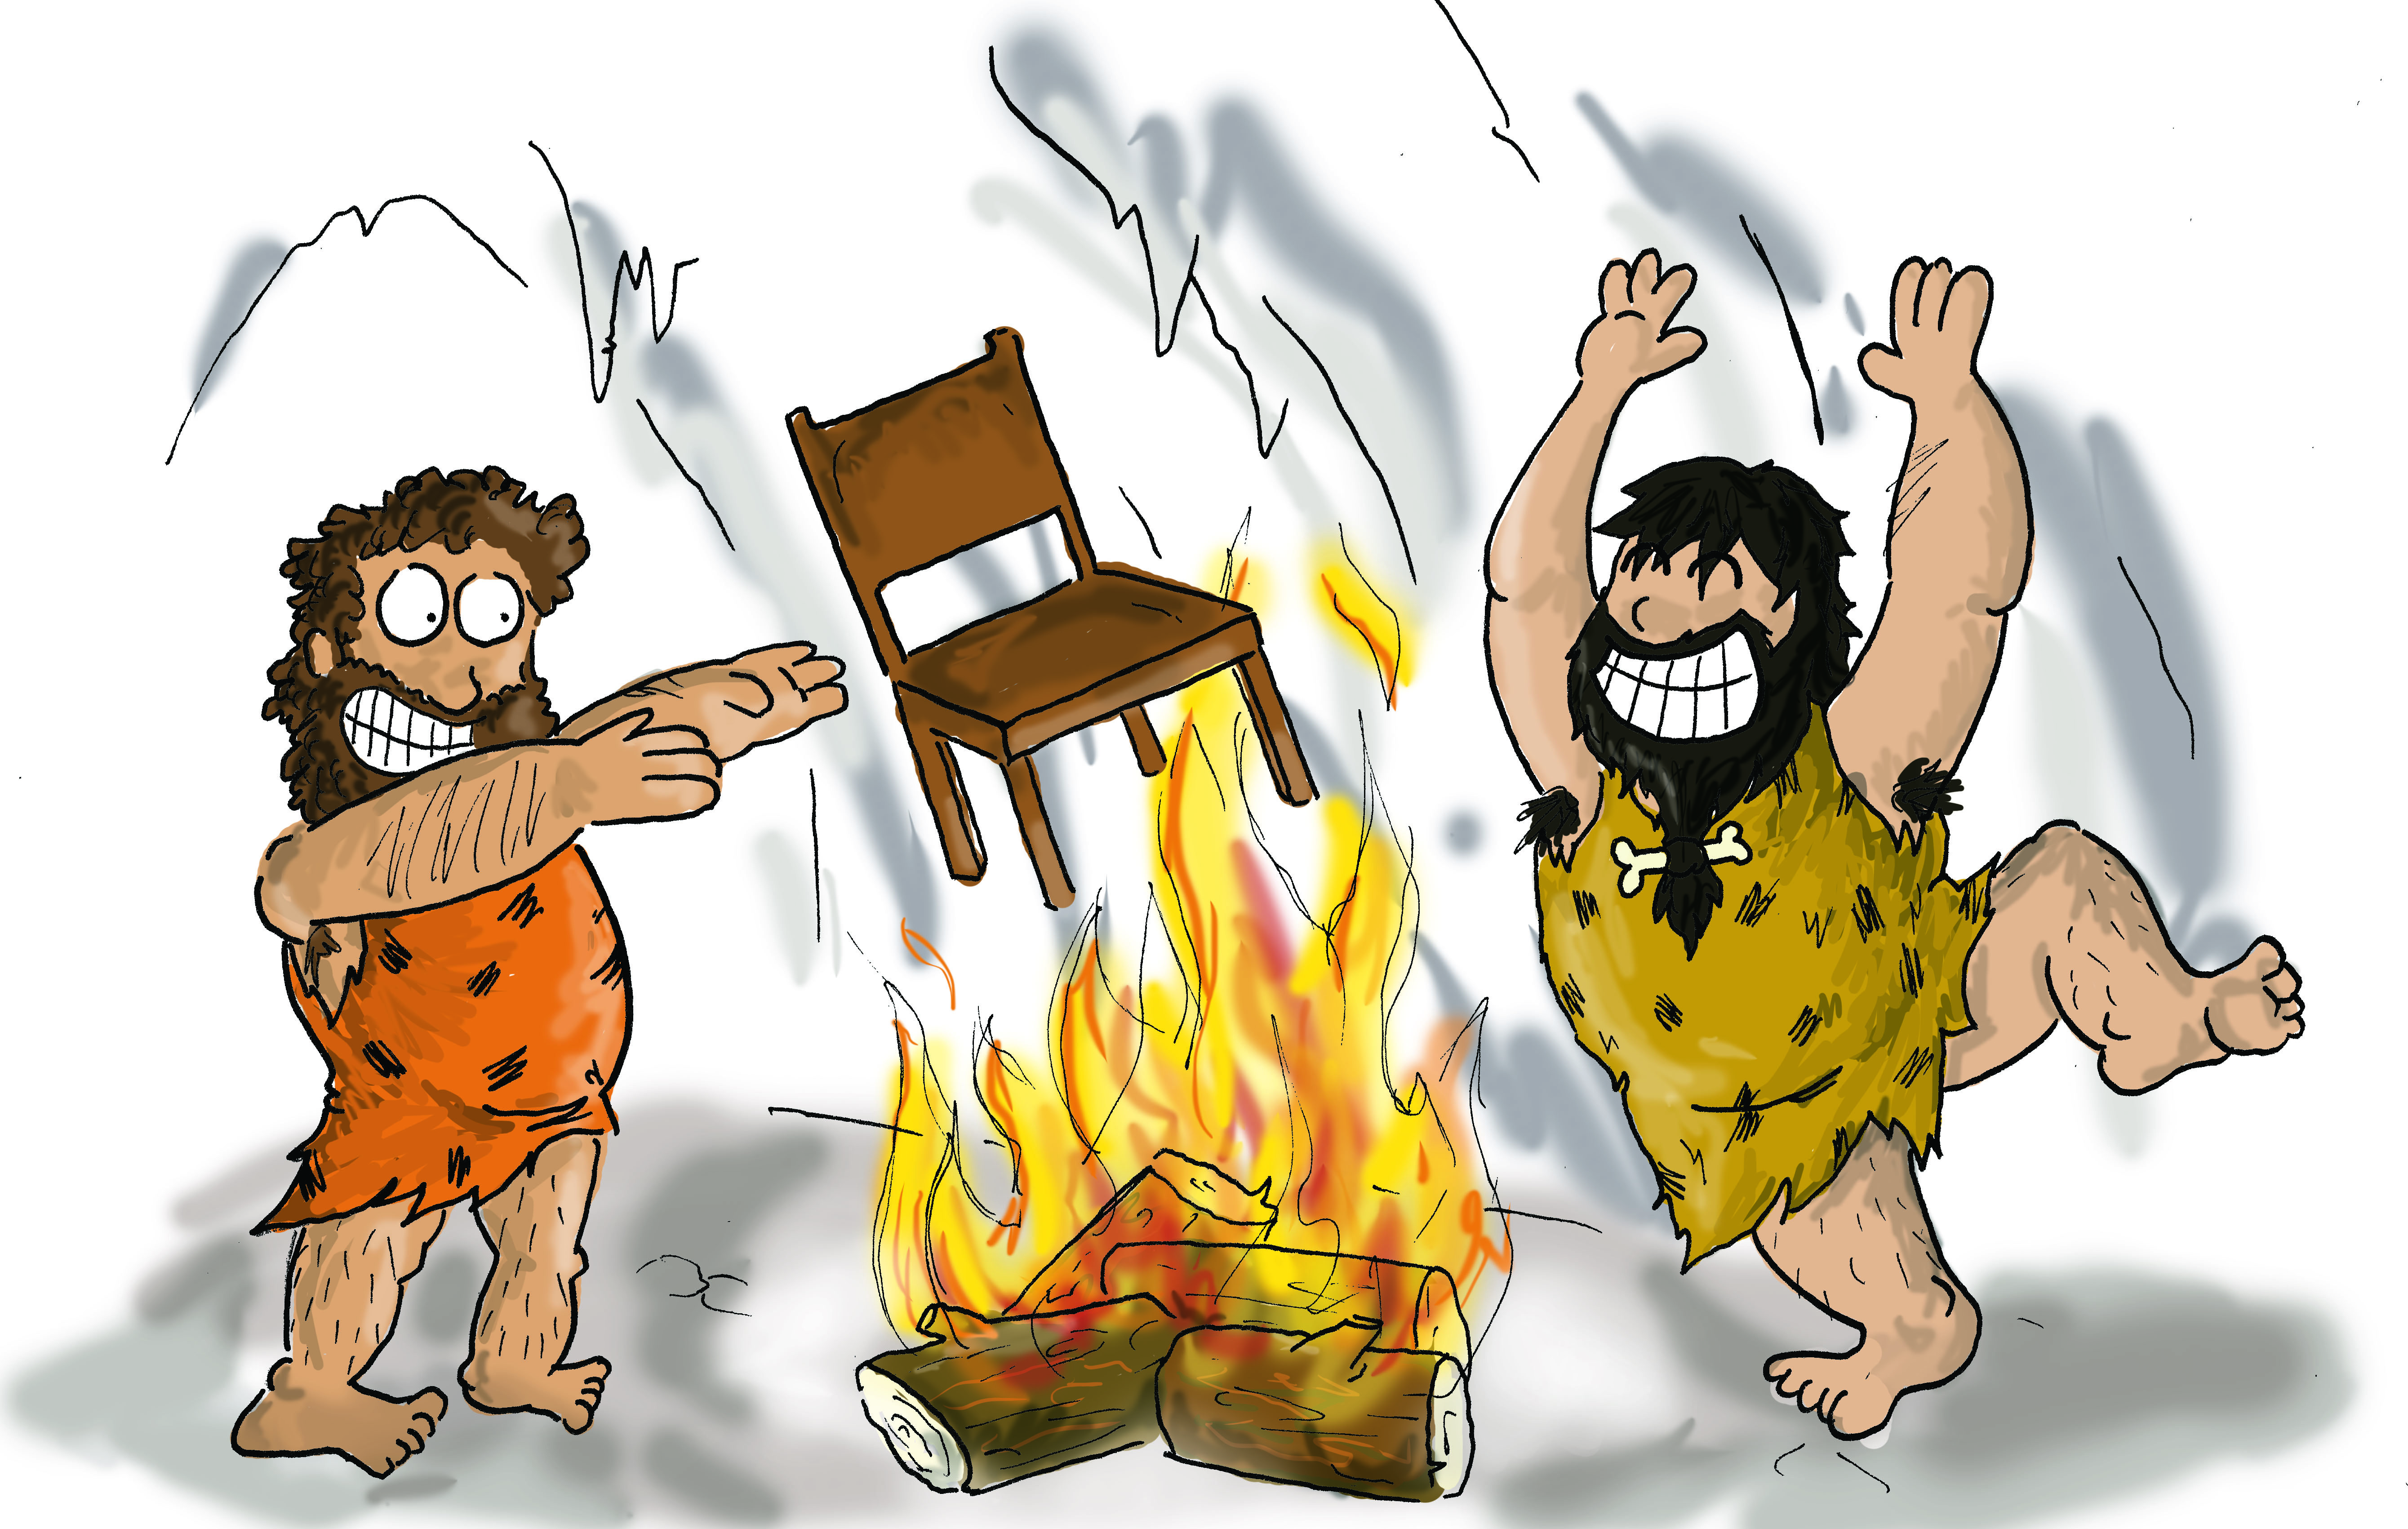 Cavemen Oog and Moog were headed back to their cave after a particularly wi...